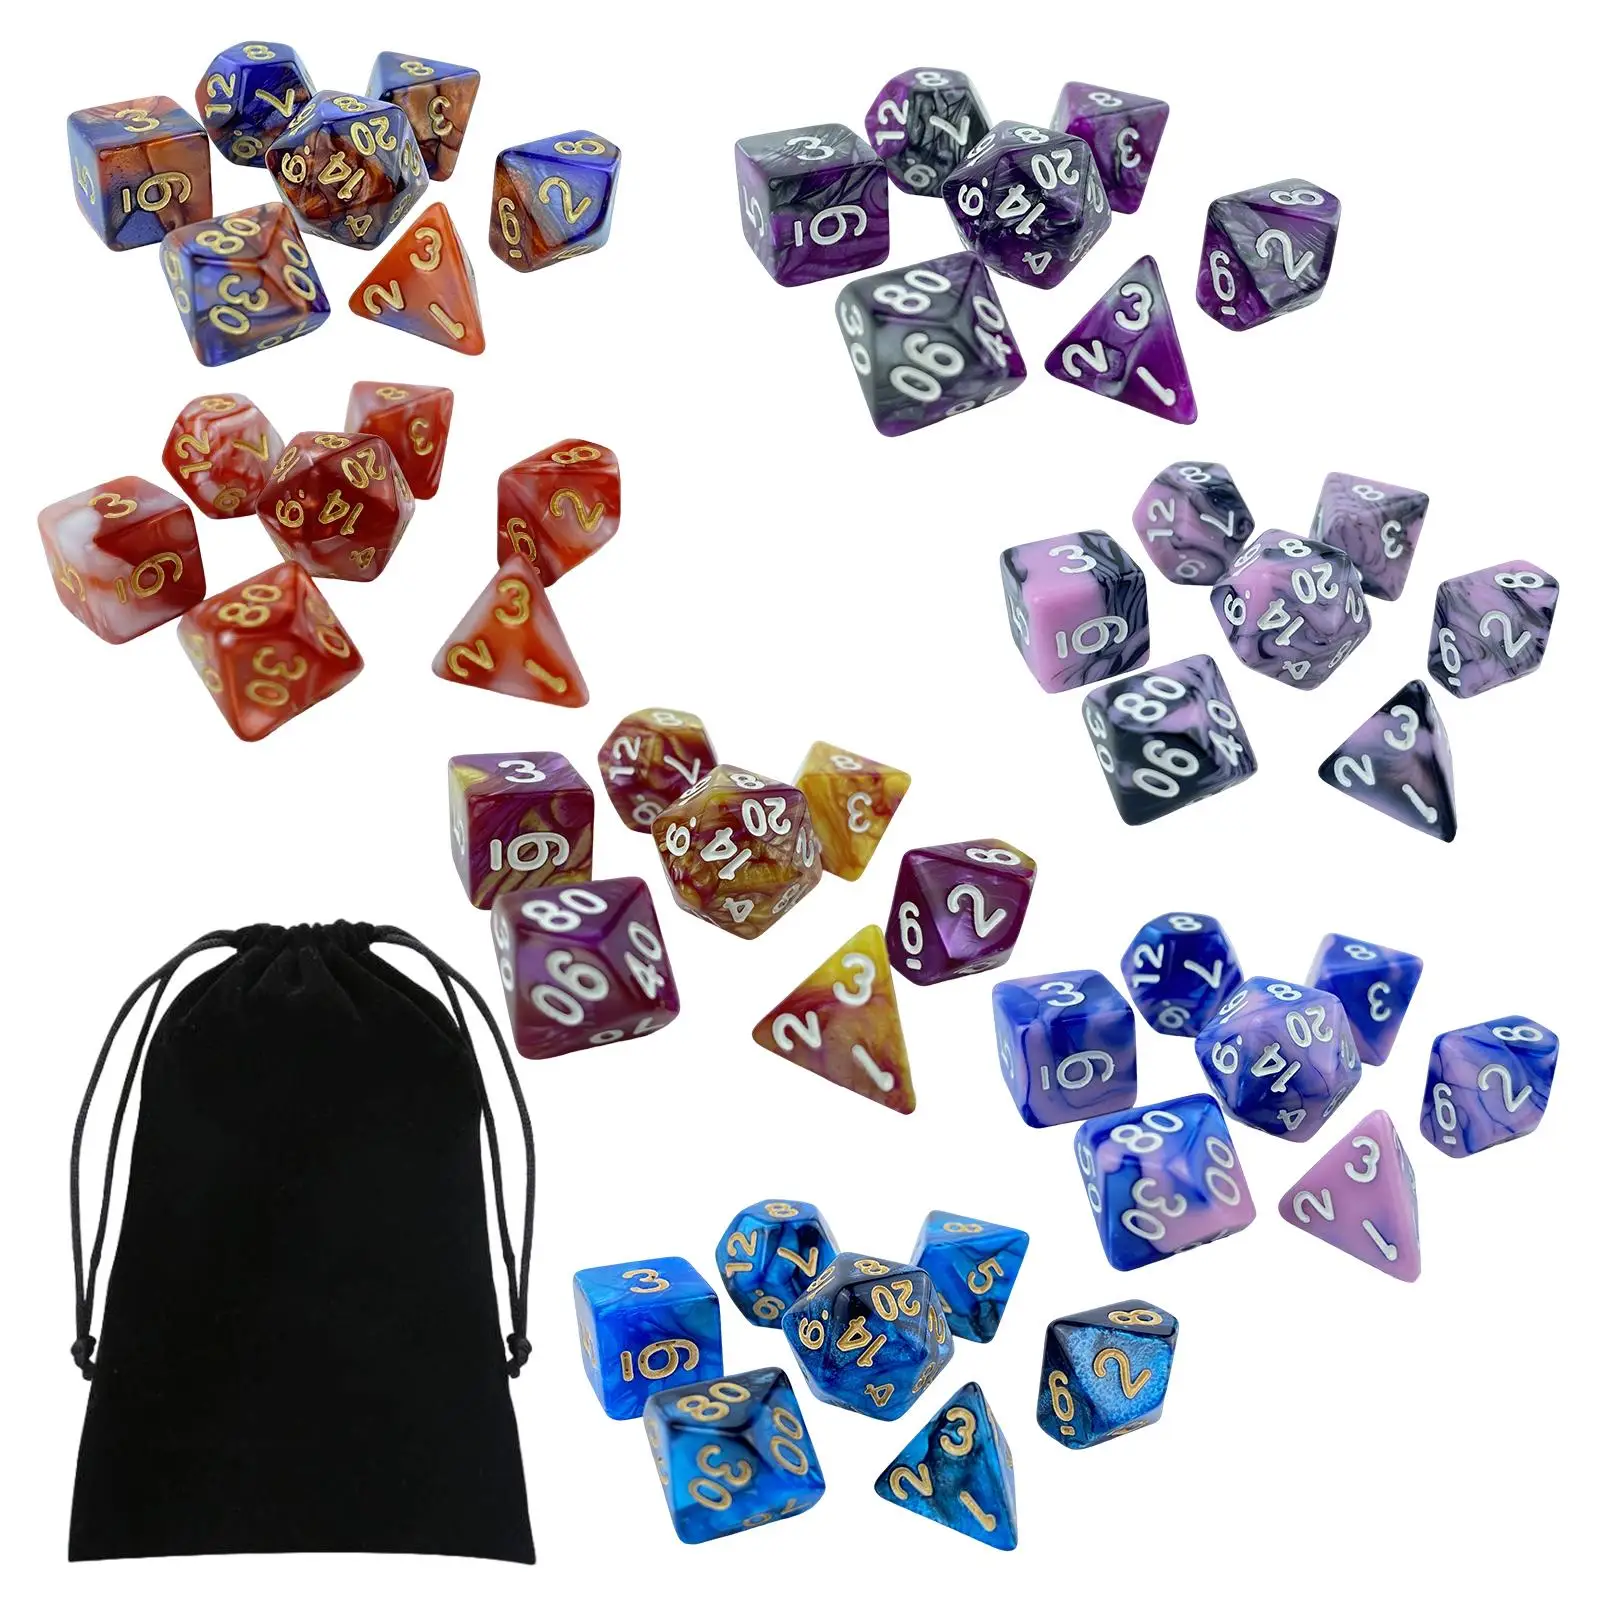 49 Pieces Engraved Polyhedral Dices Set Toys Bicolor for Board Game Props